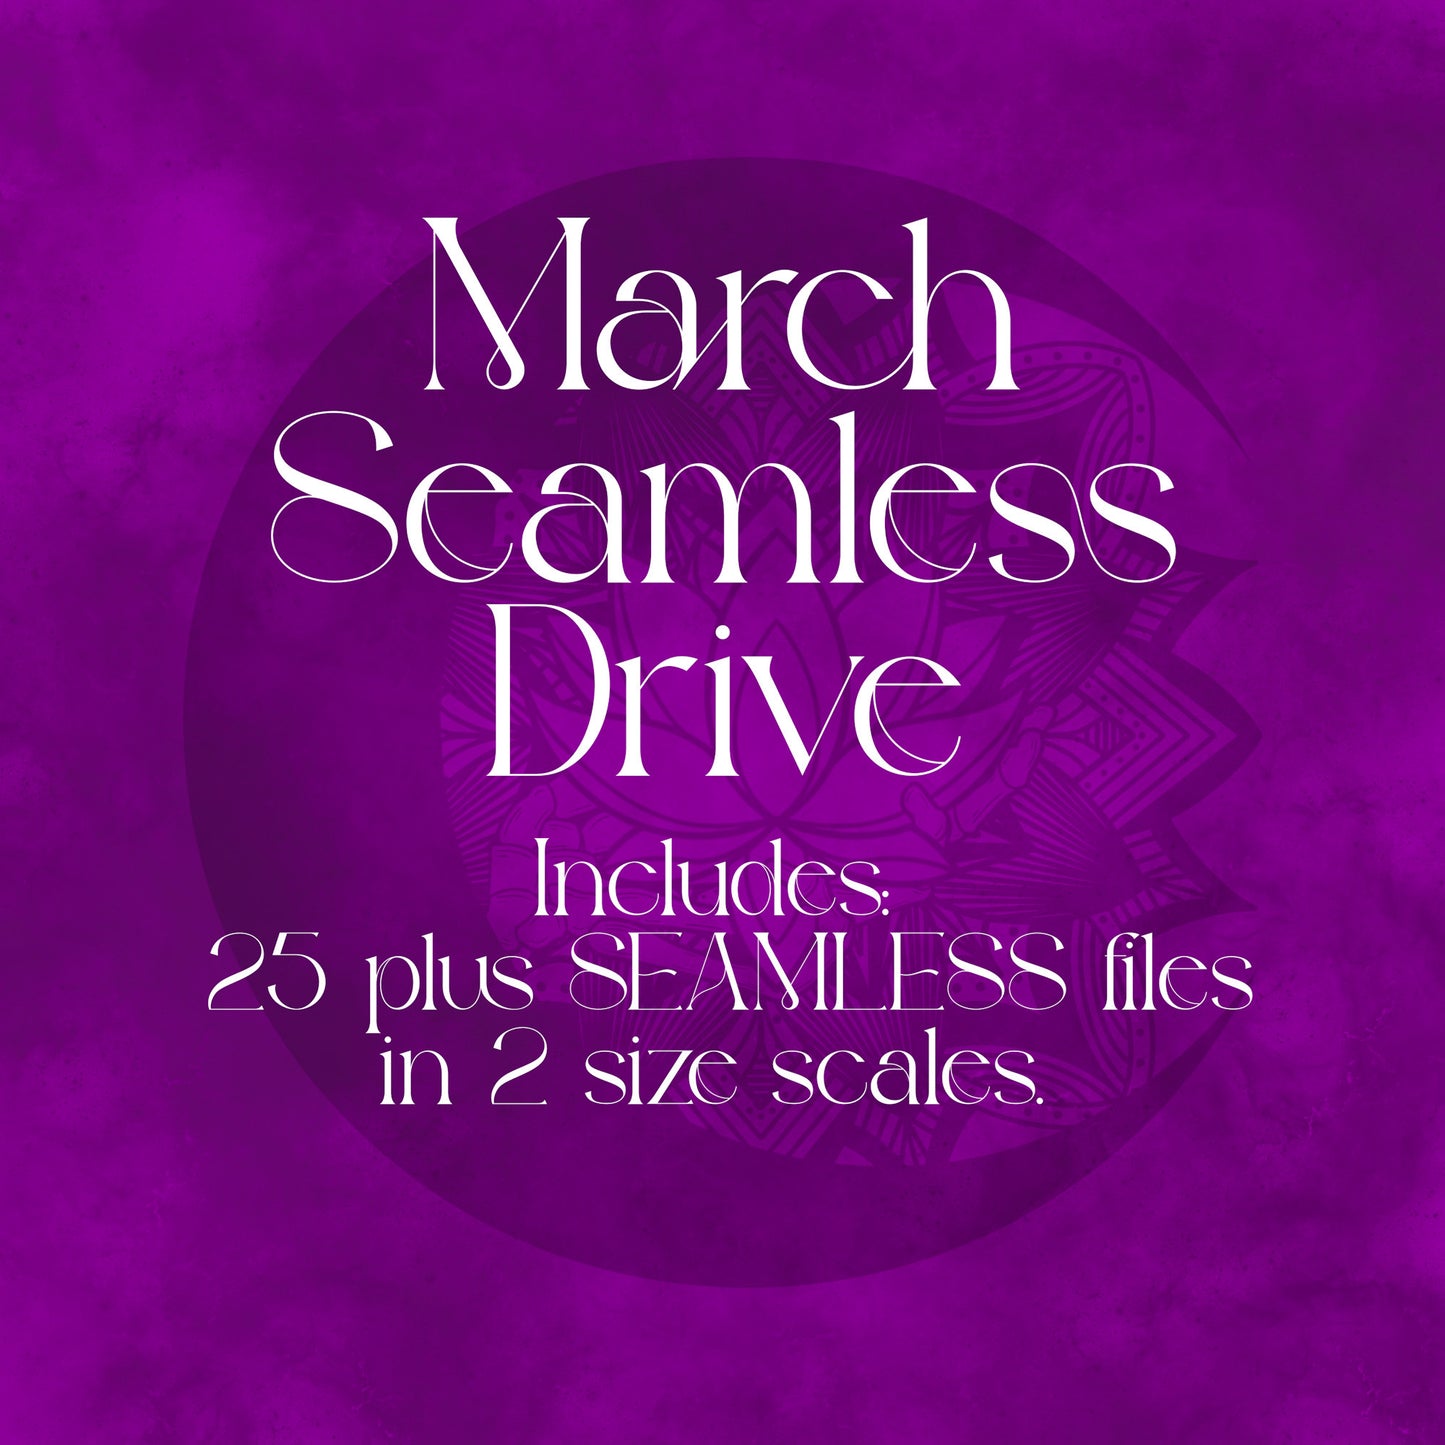 March Seamless Drive